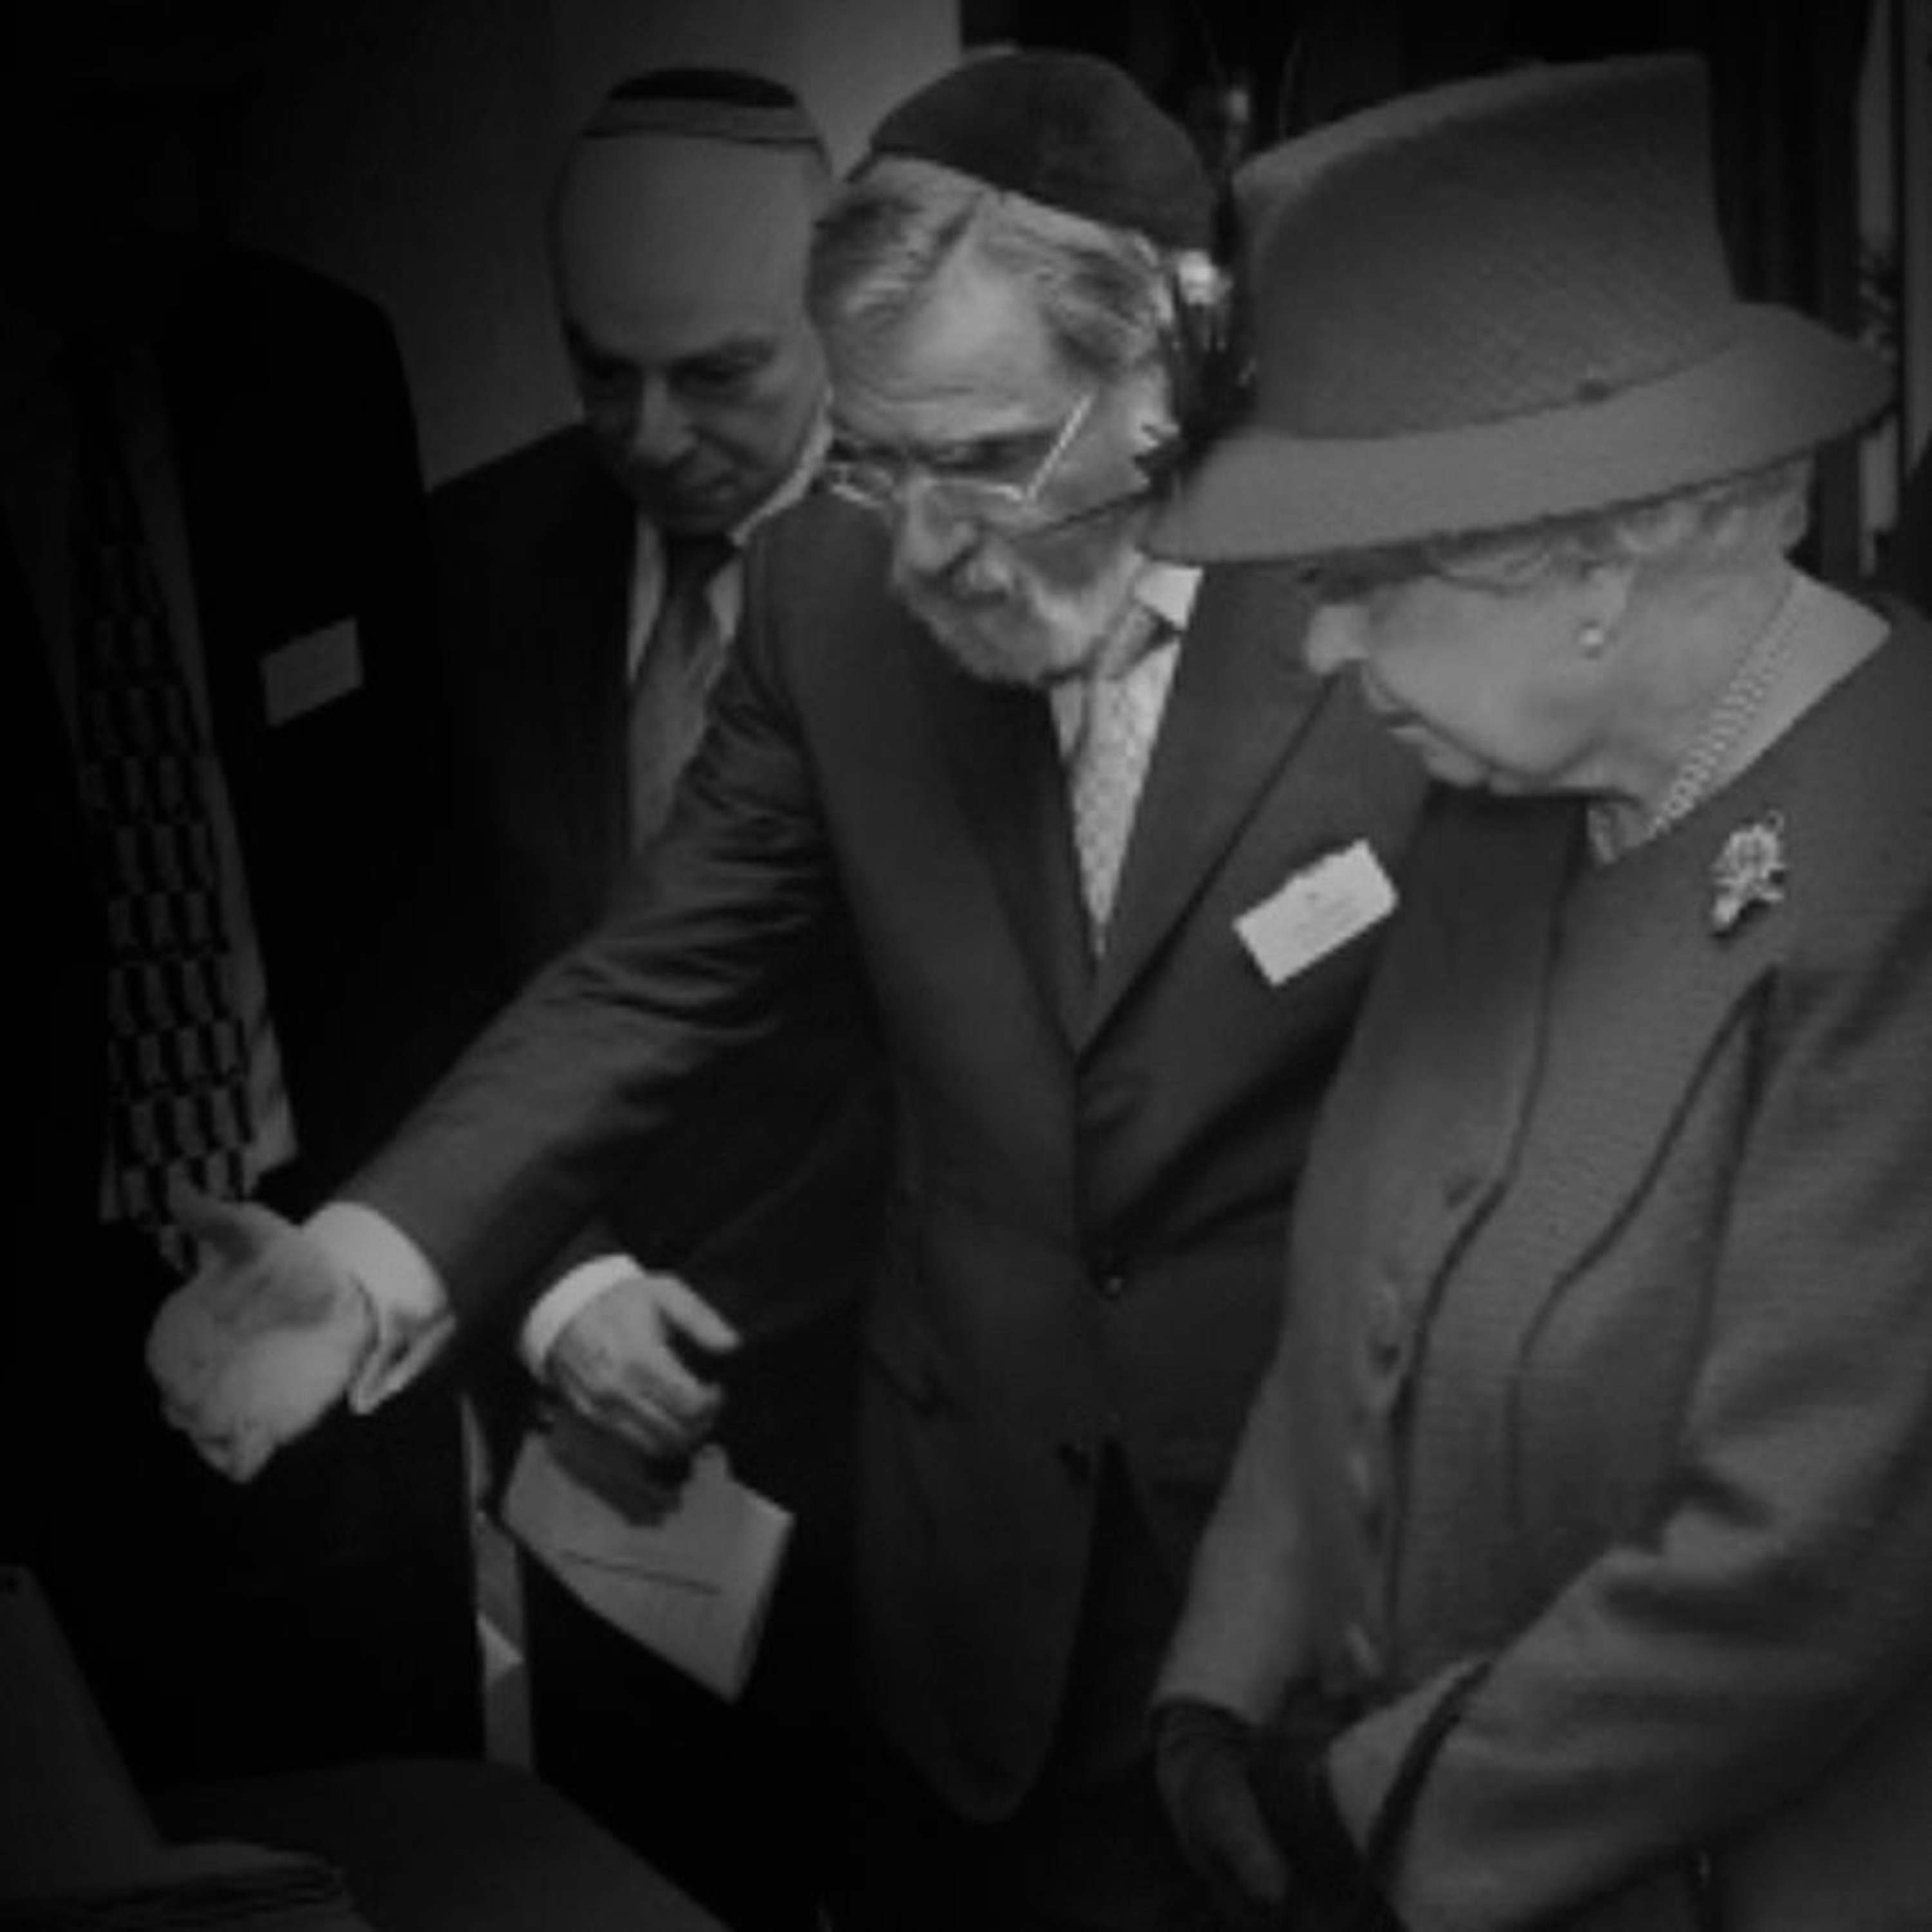 Rabbi Sacks on the Queen: Where you find greatness there you find humility, June 2012